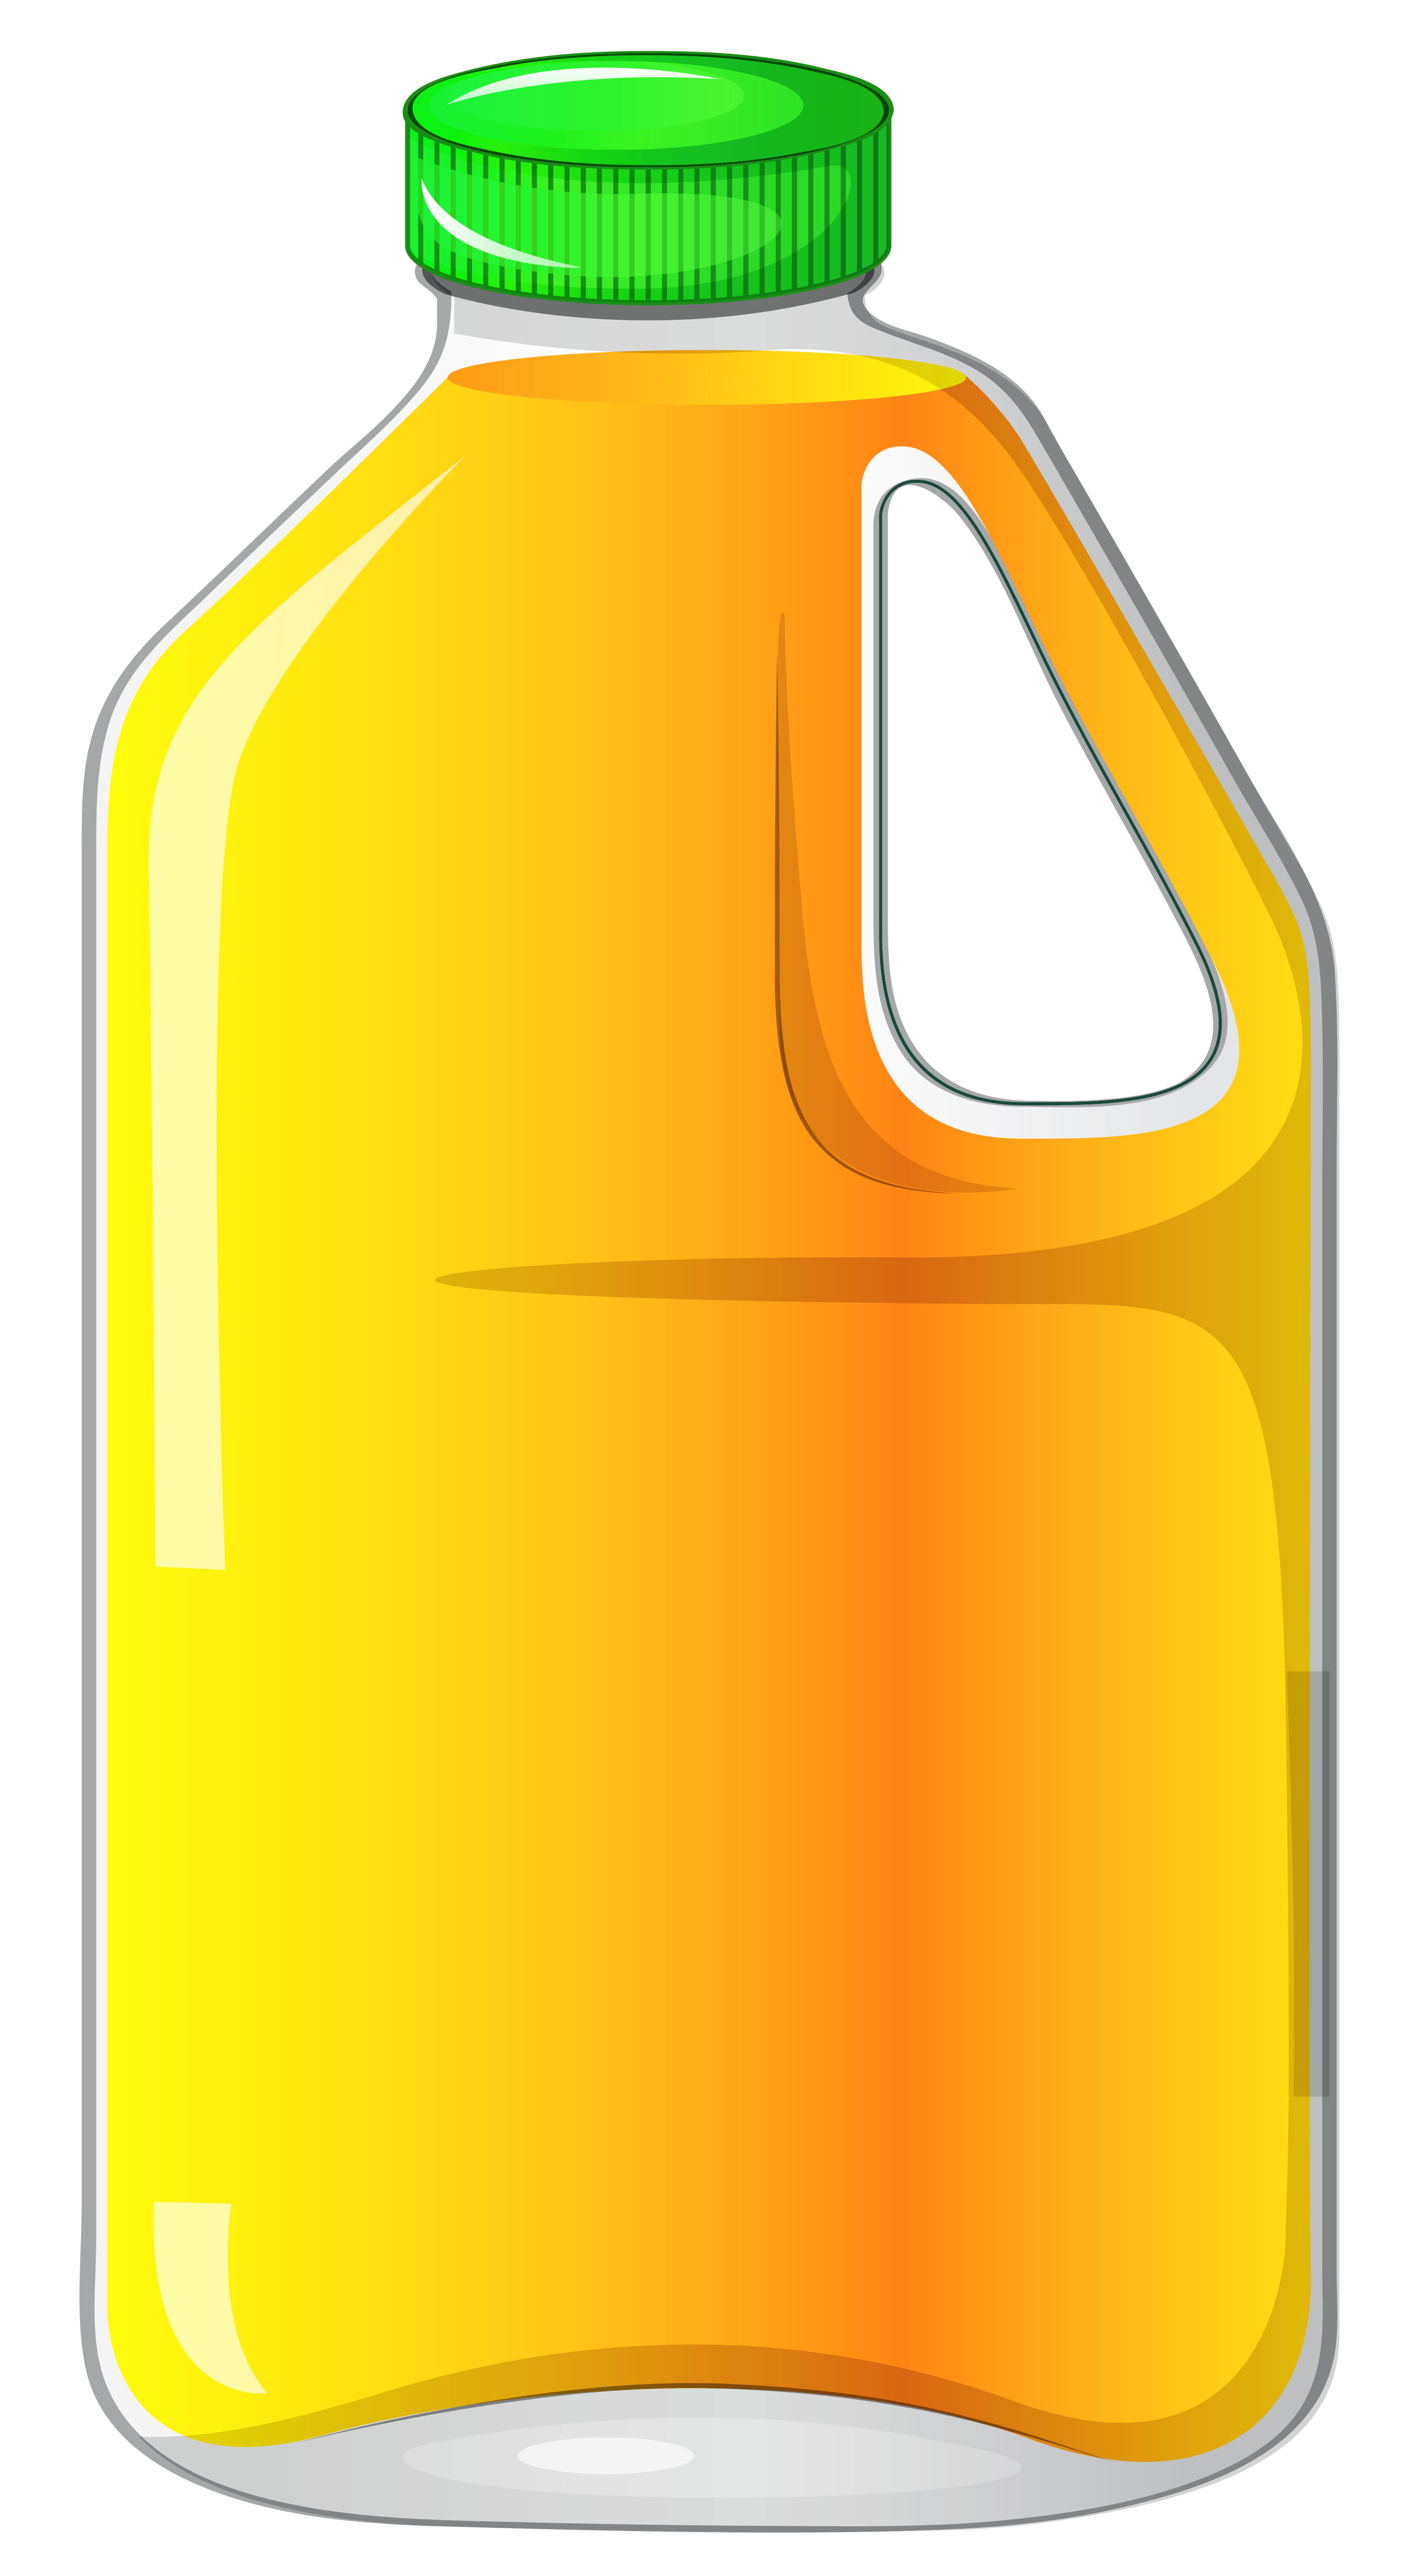 https://gallery.yopriceville.com/var/albums/Free-Clipart-Pictures/Drinks-PNG-/Large_Bottle_with_Orange_Juice_PNG_Clipart.png?m=1434423301